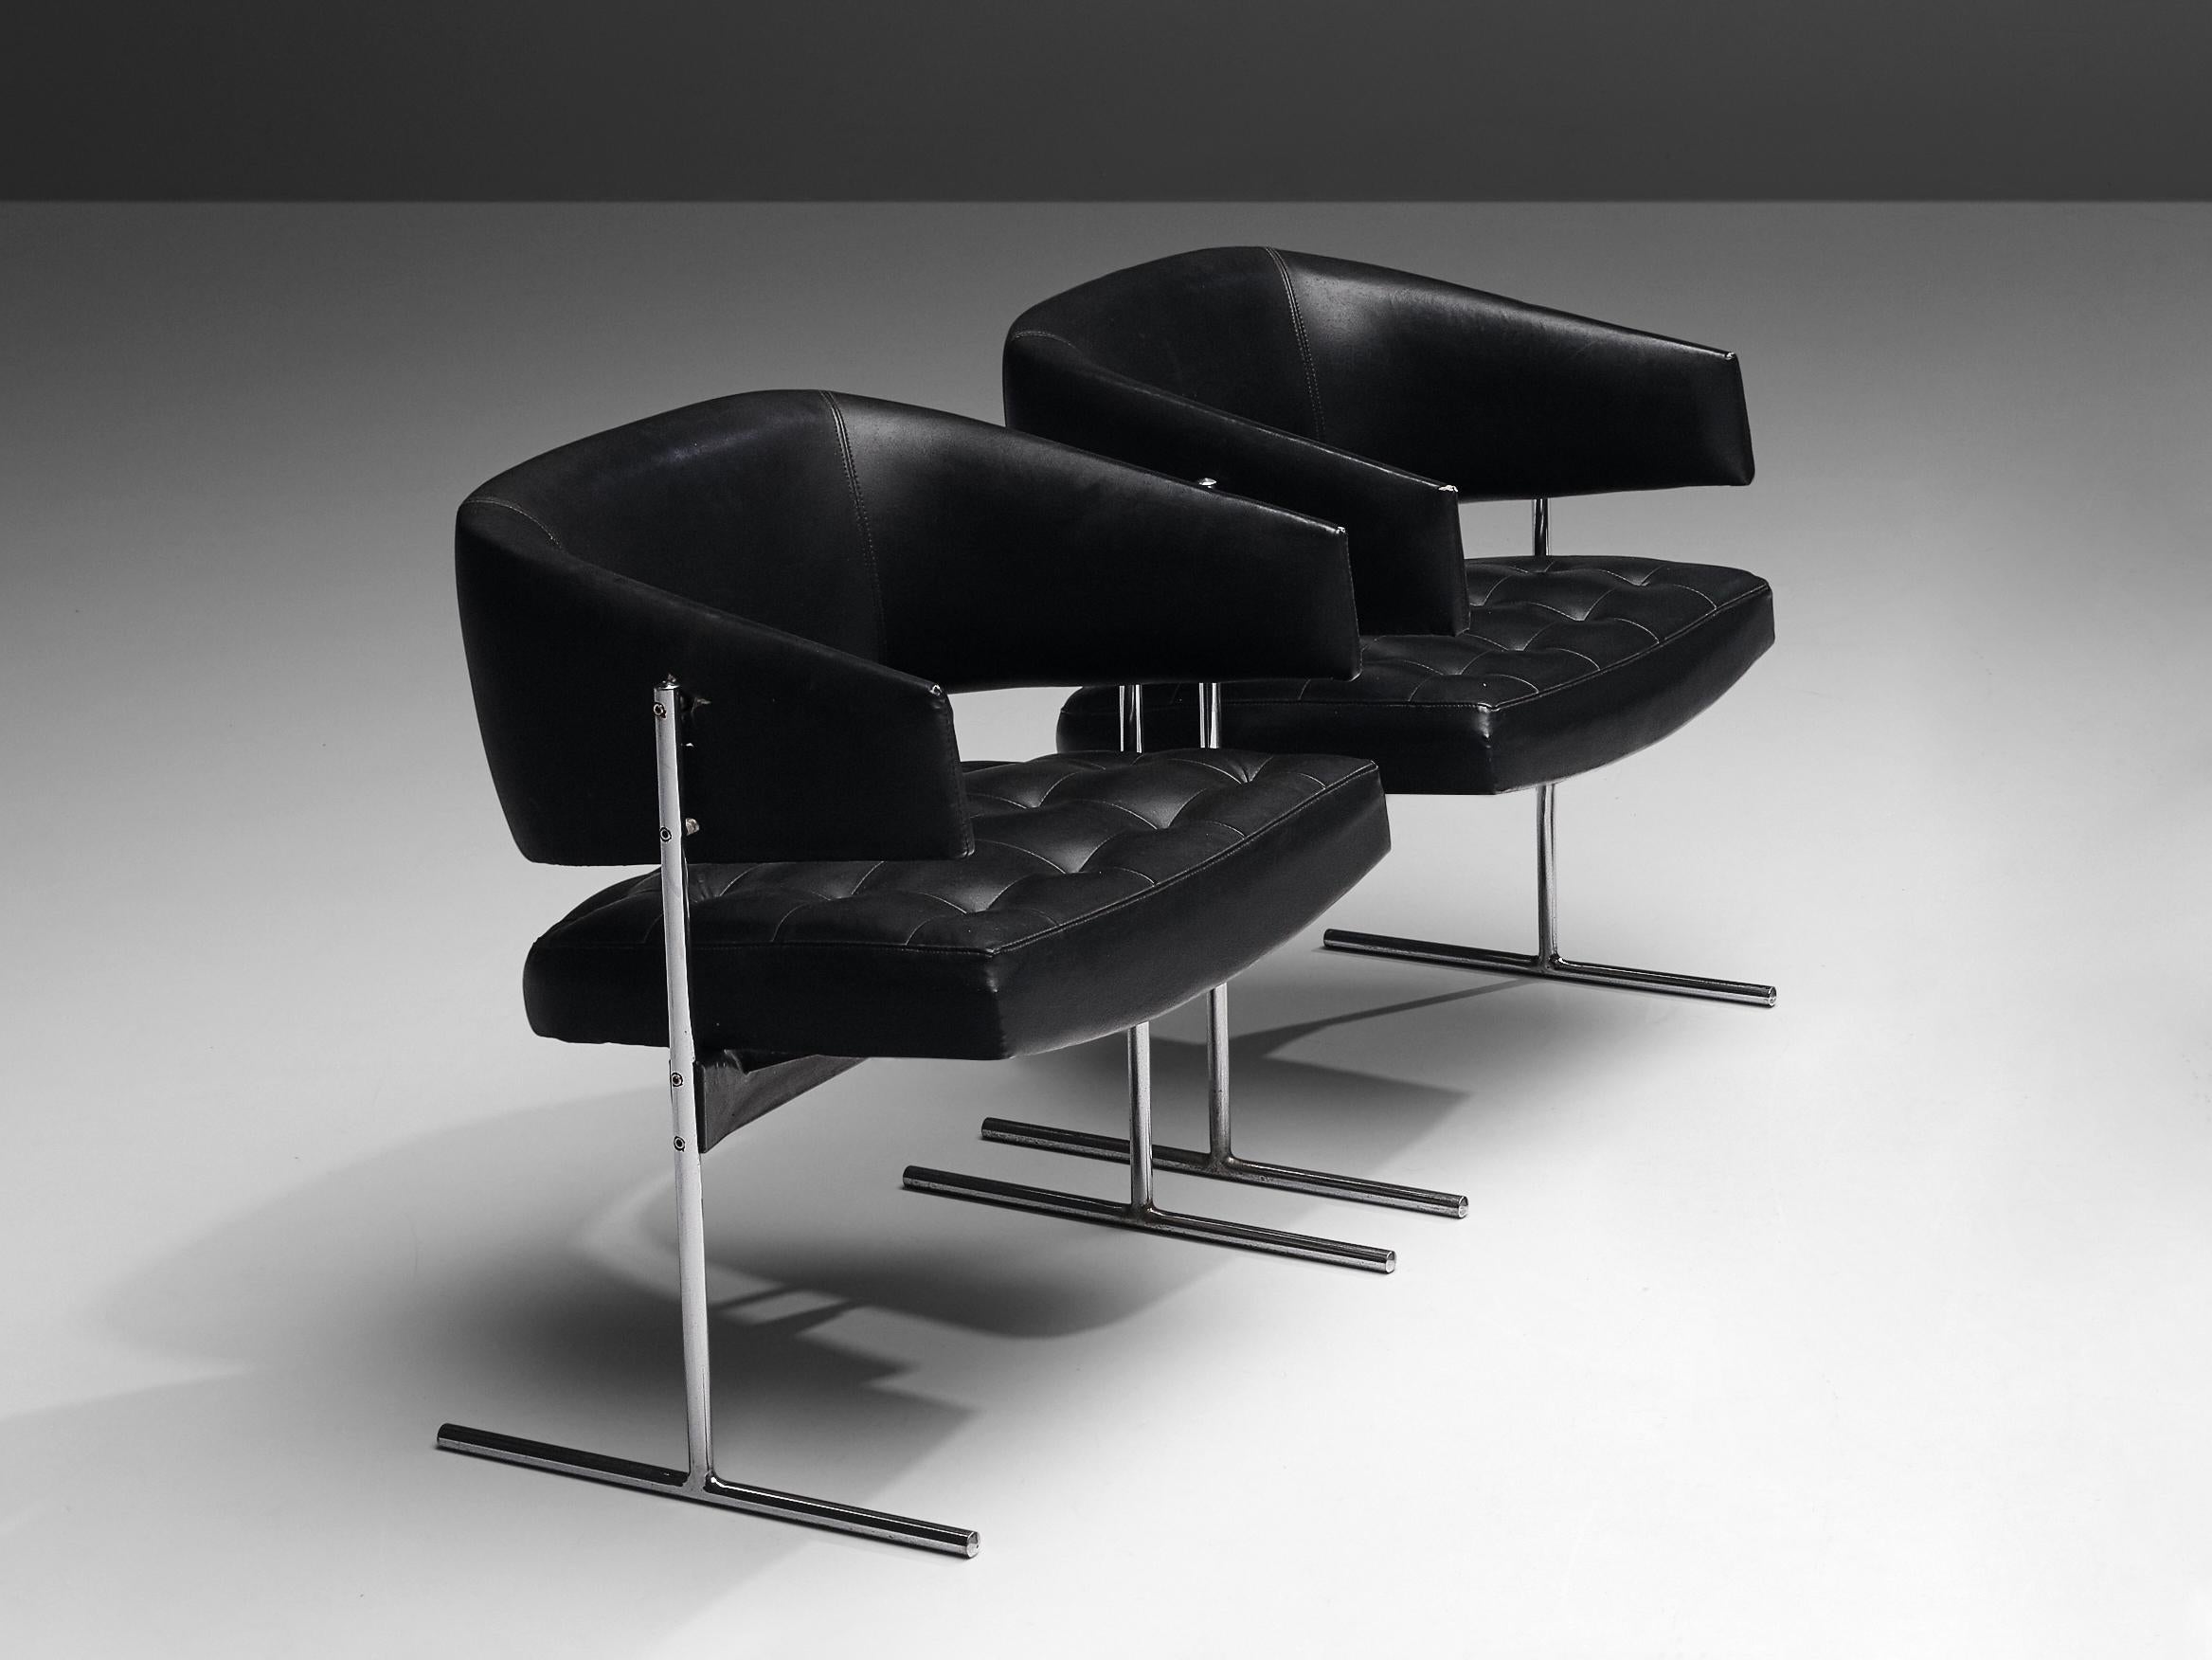 Jorge Zalsupin for Poltrona, pair of armchairs model 'Senior', metal, leatherette, Brazil, design 1950

These chairs stand on slim metal feet in the shape of 'T'. The legs lift up the seat with tufted details and the backrest that goes over into the